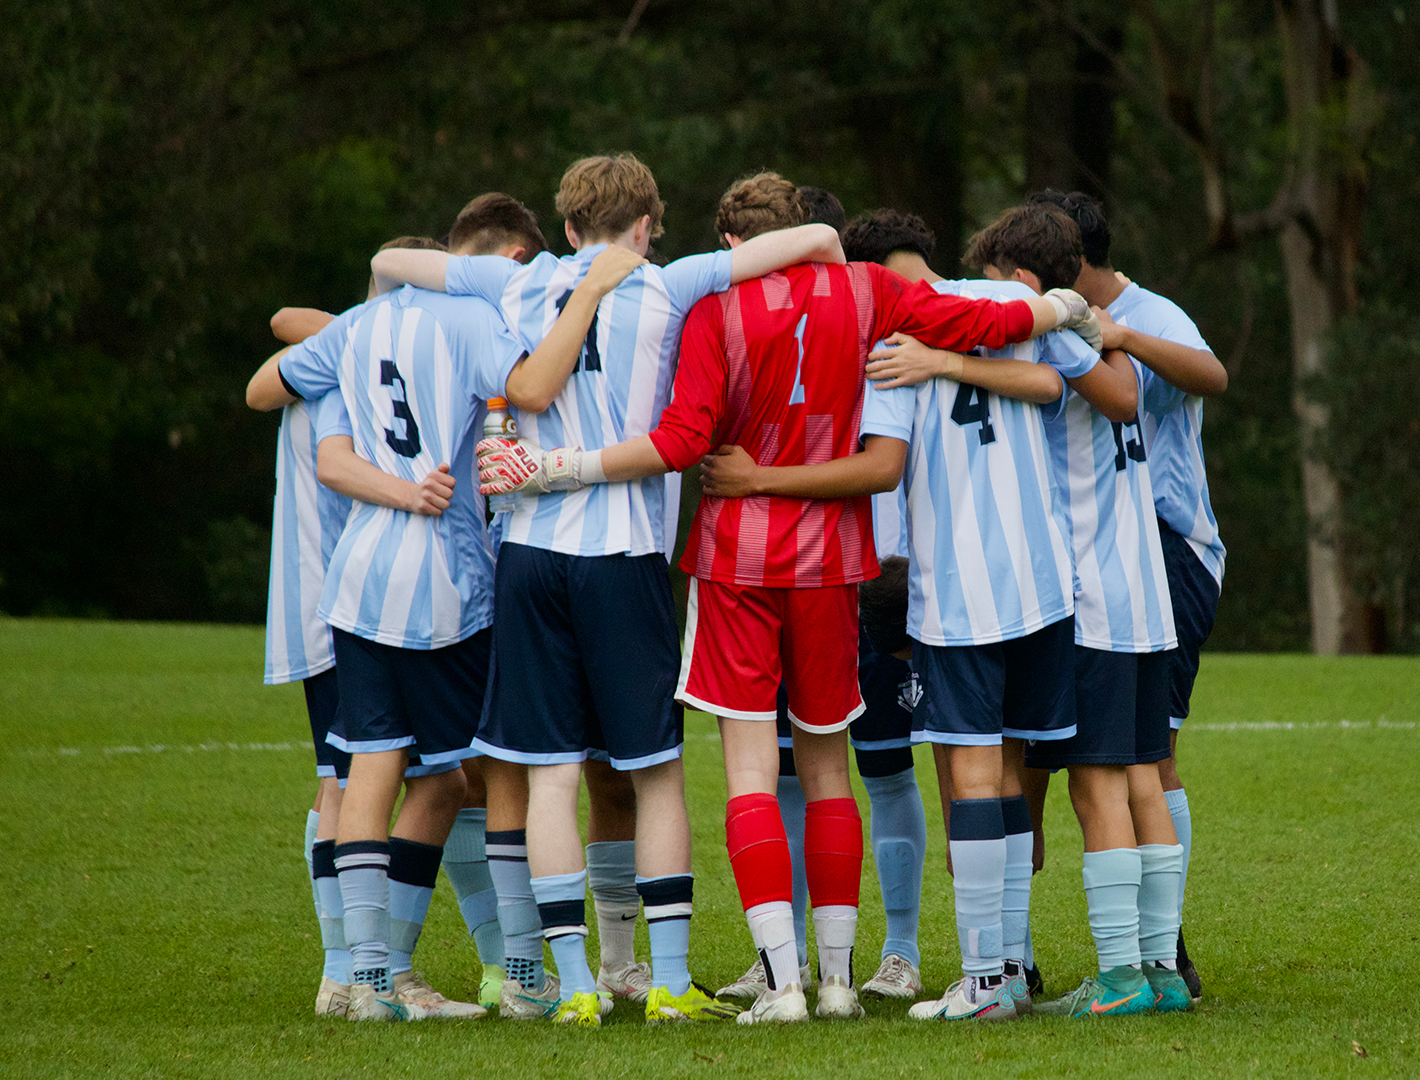 Football players arm in arm before a match